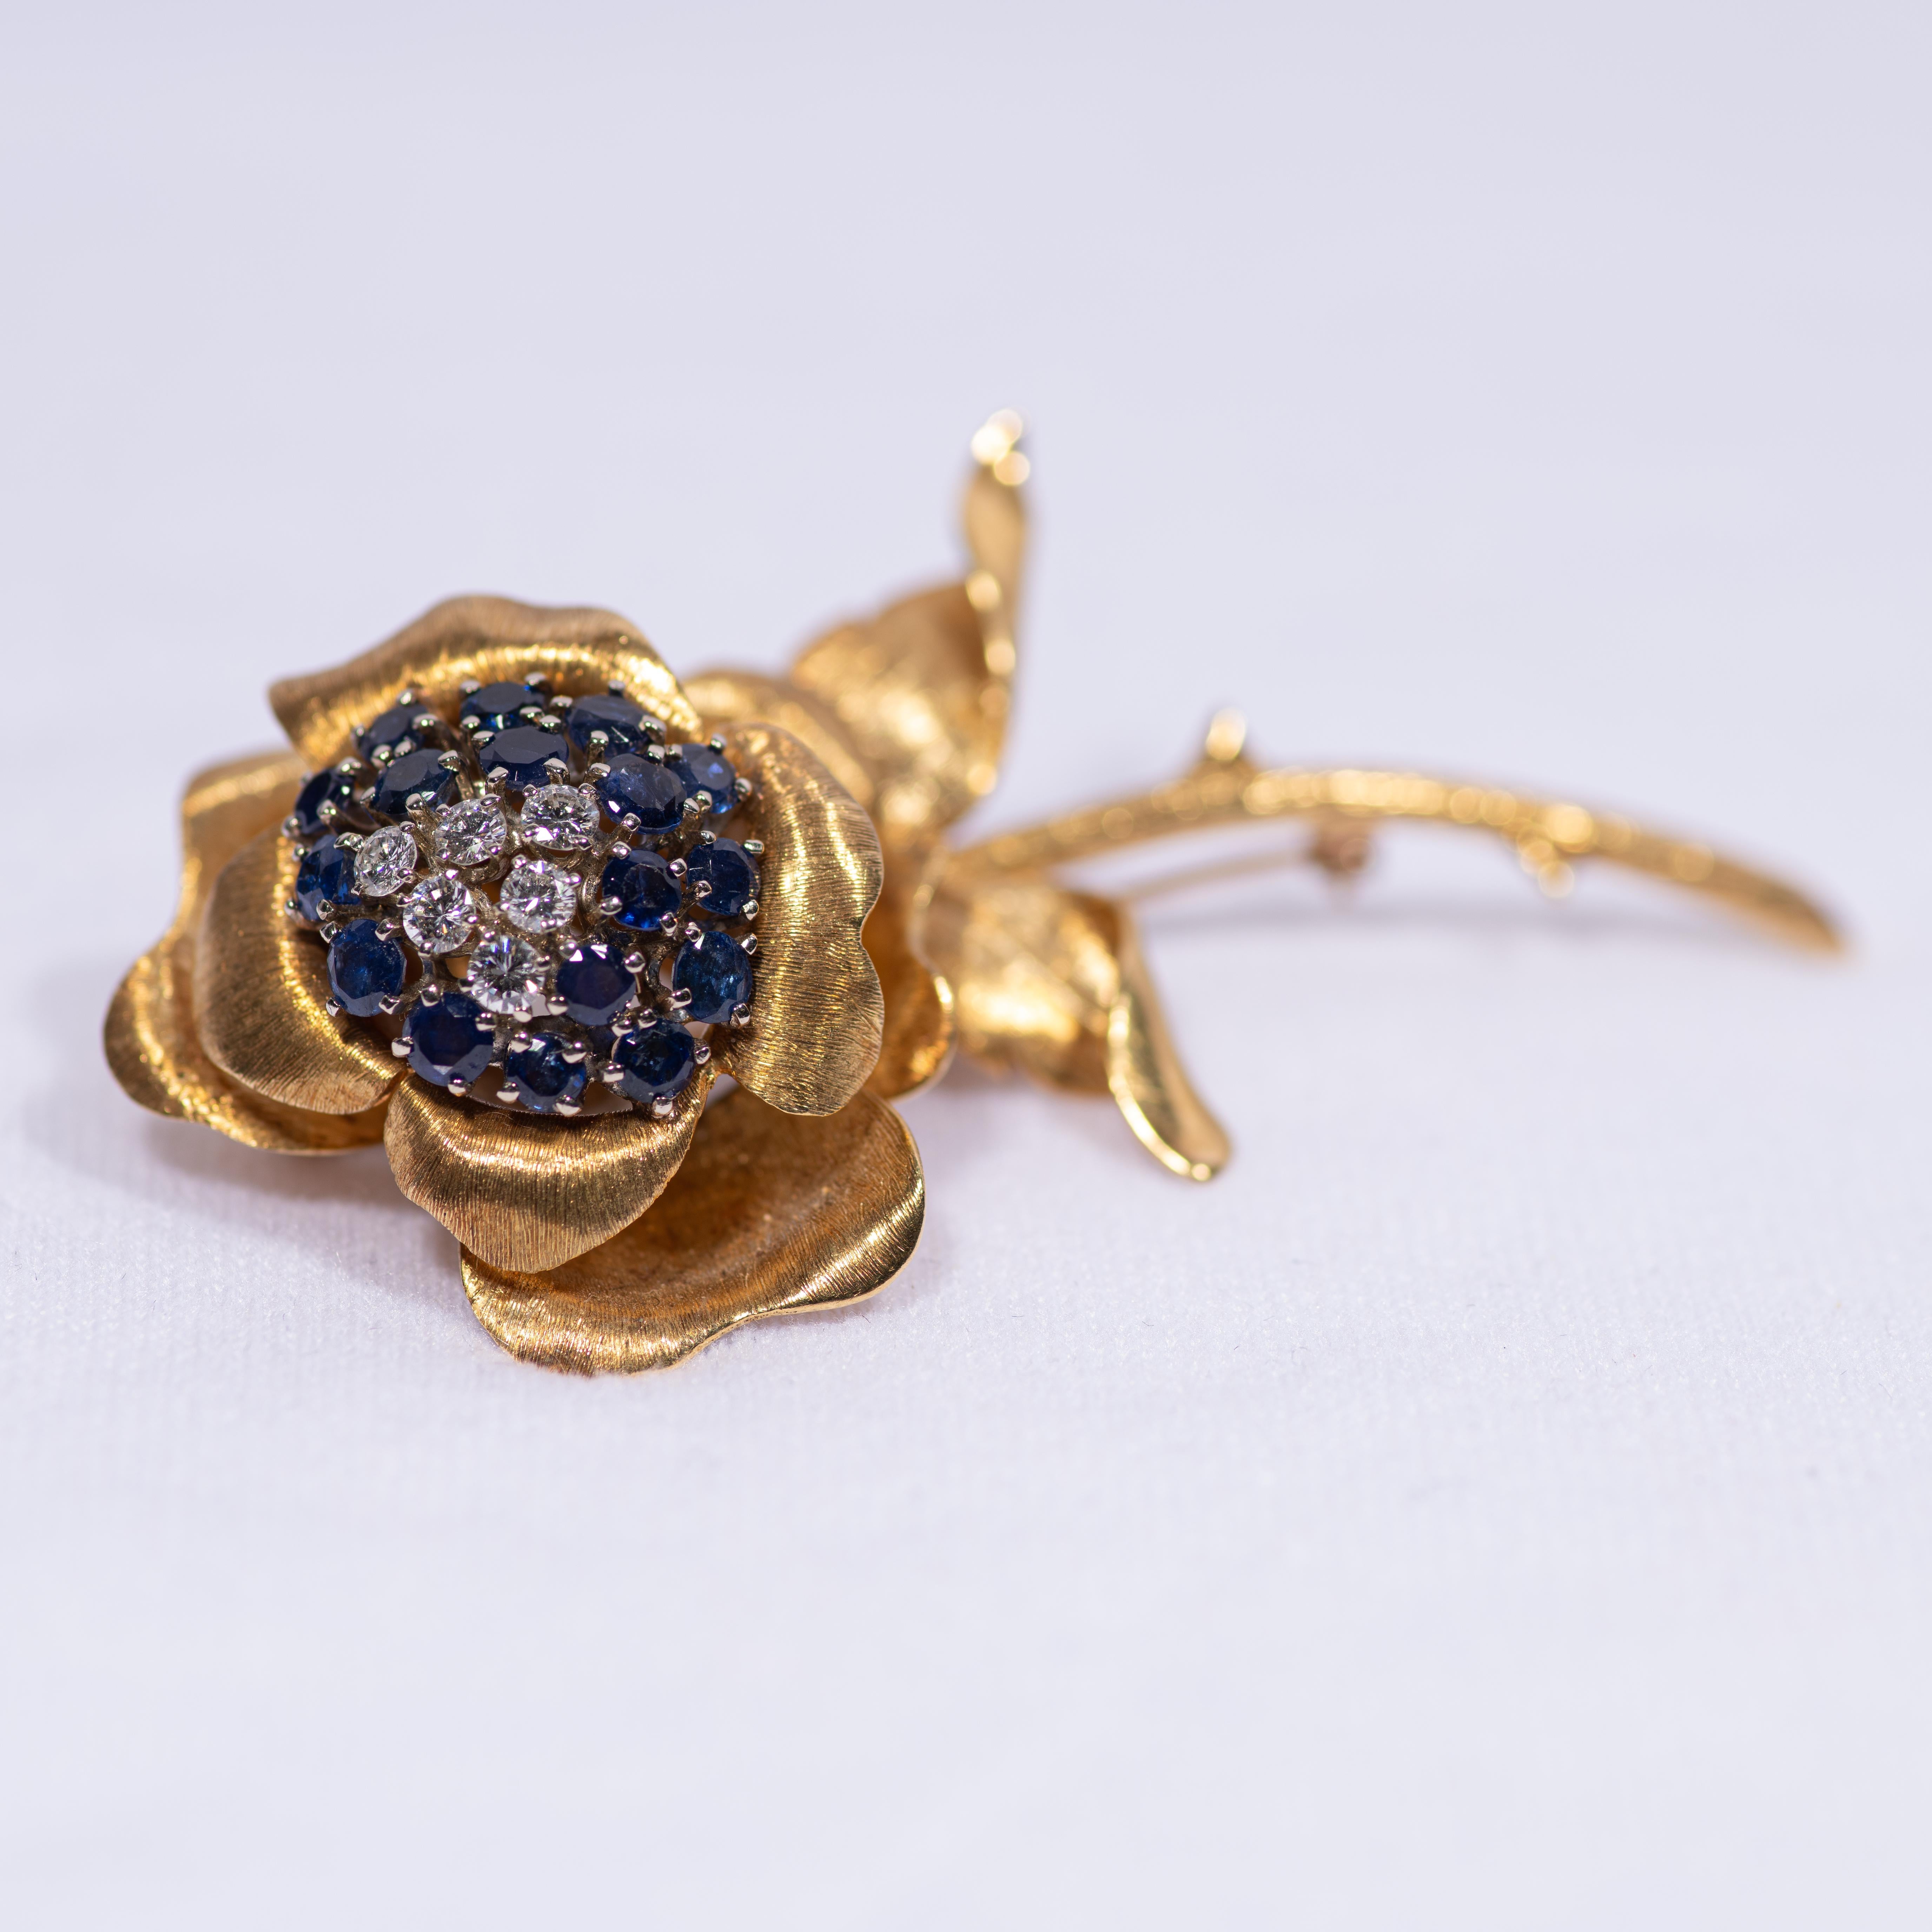 A fine and heavy flower brooch in the form of a stemmed rose. The rose's petals, stem and thorns crafted in textured Florentine finished yellow gold, with pistils of blue sapphire, and stamen of diamonds. 

The center of the rose embellished with 17